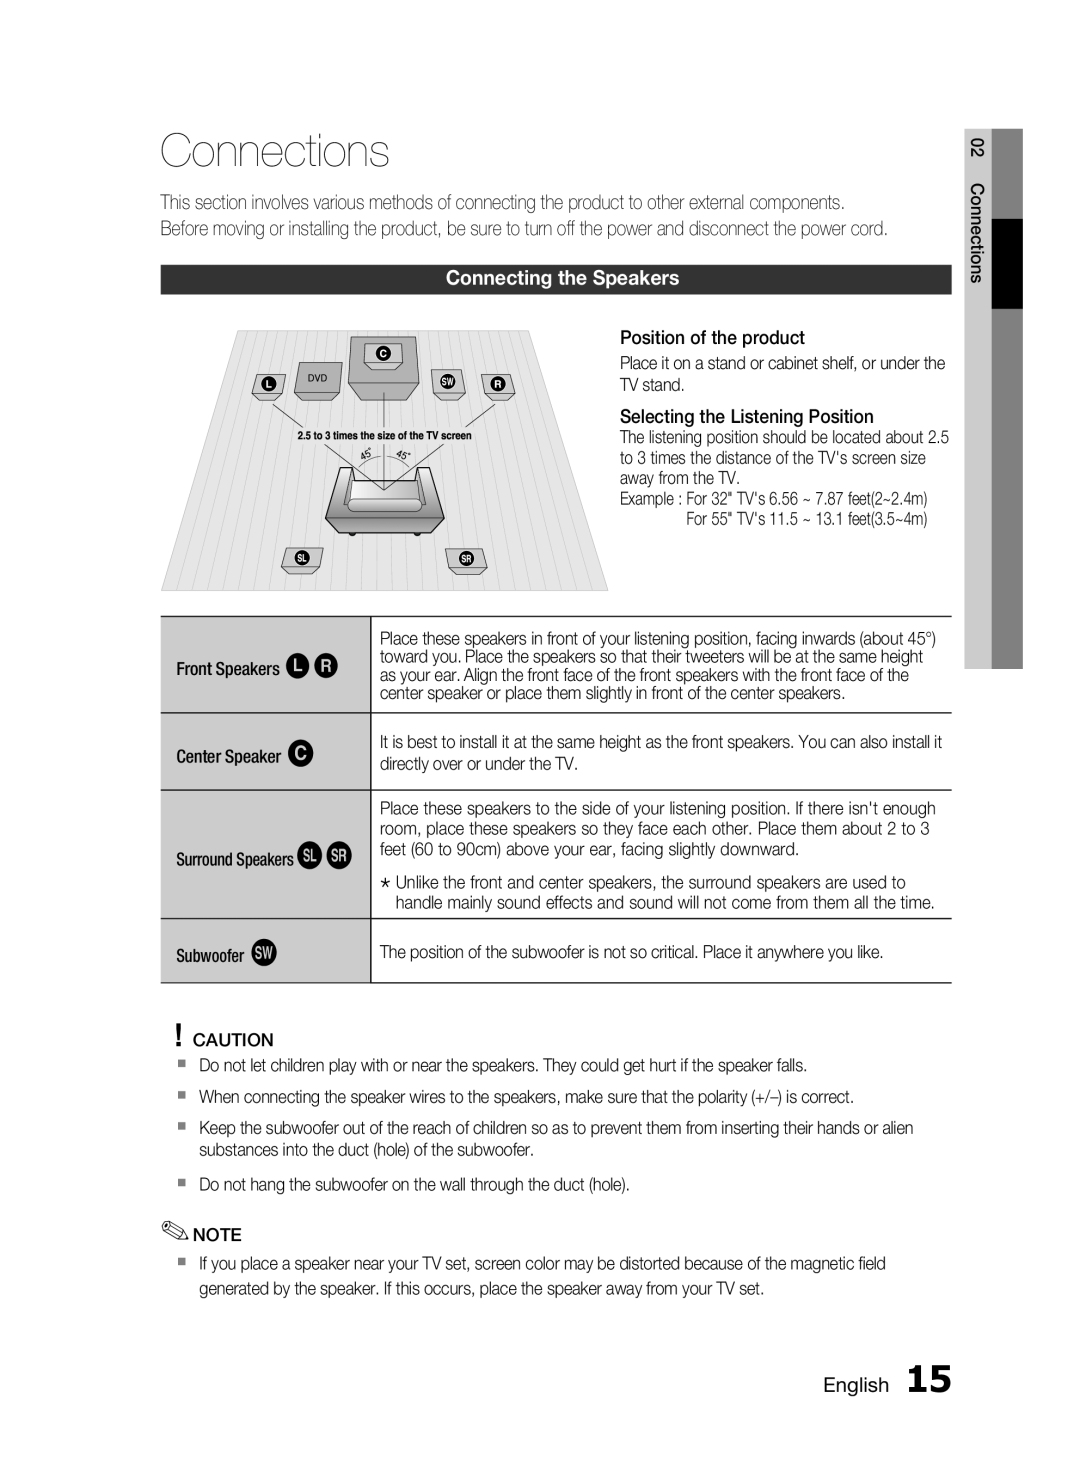 Samsung HT-D553, HT-D555, HT-D550 user manual Connections, Connecting the Speakers, English 